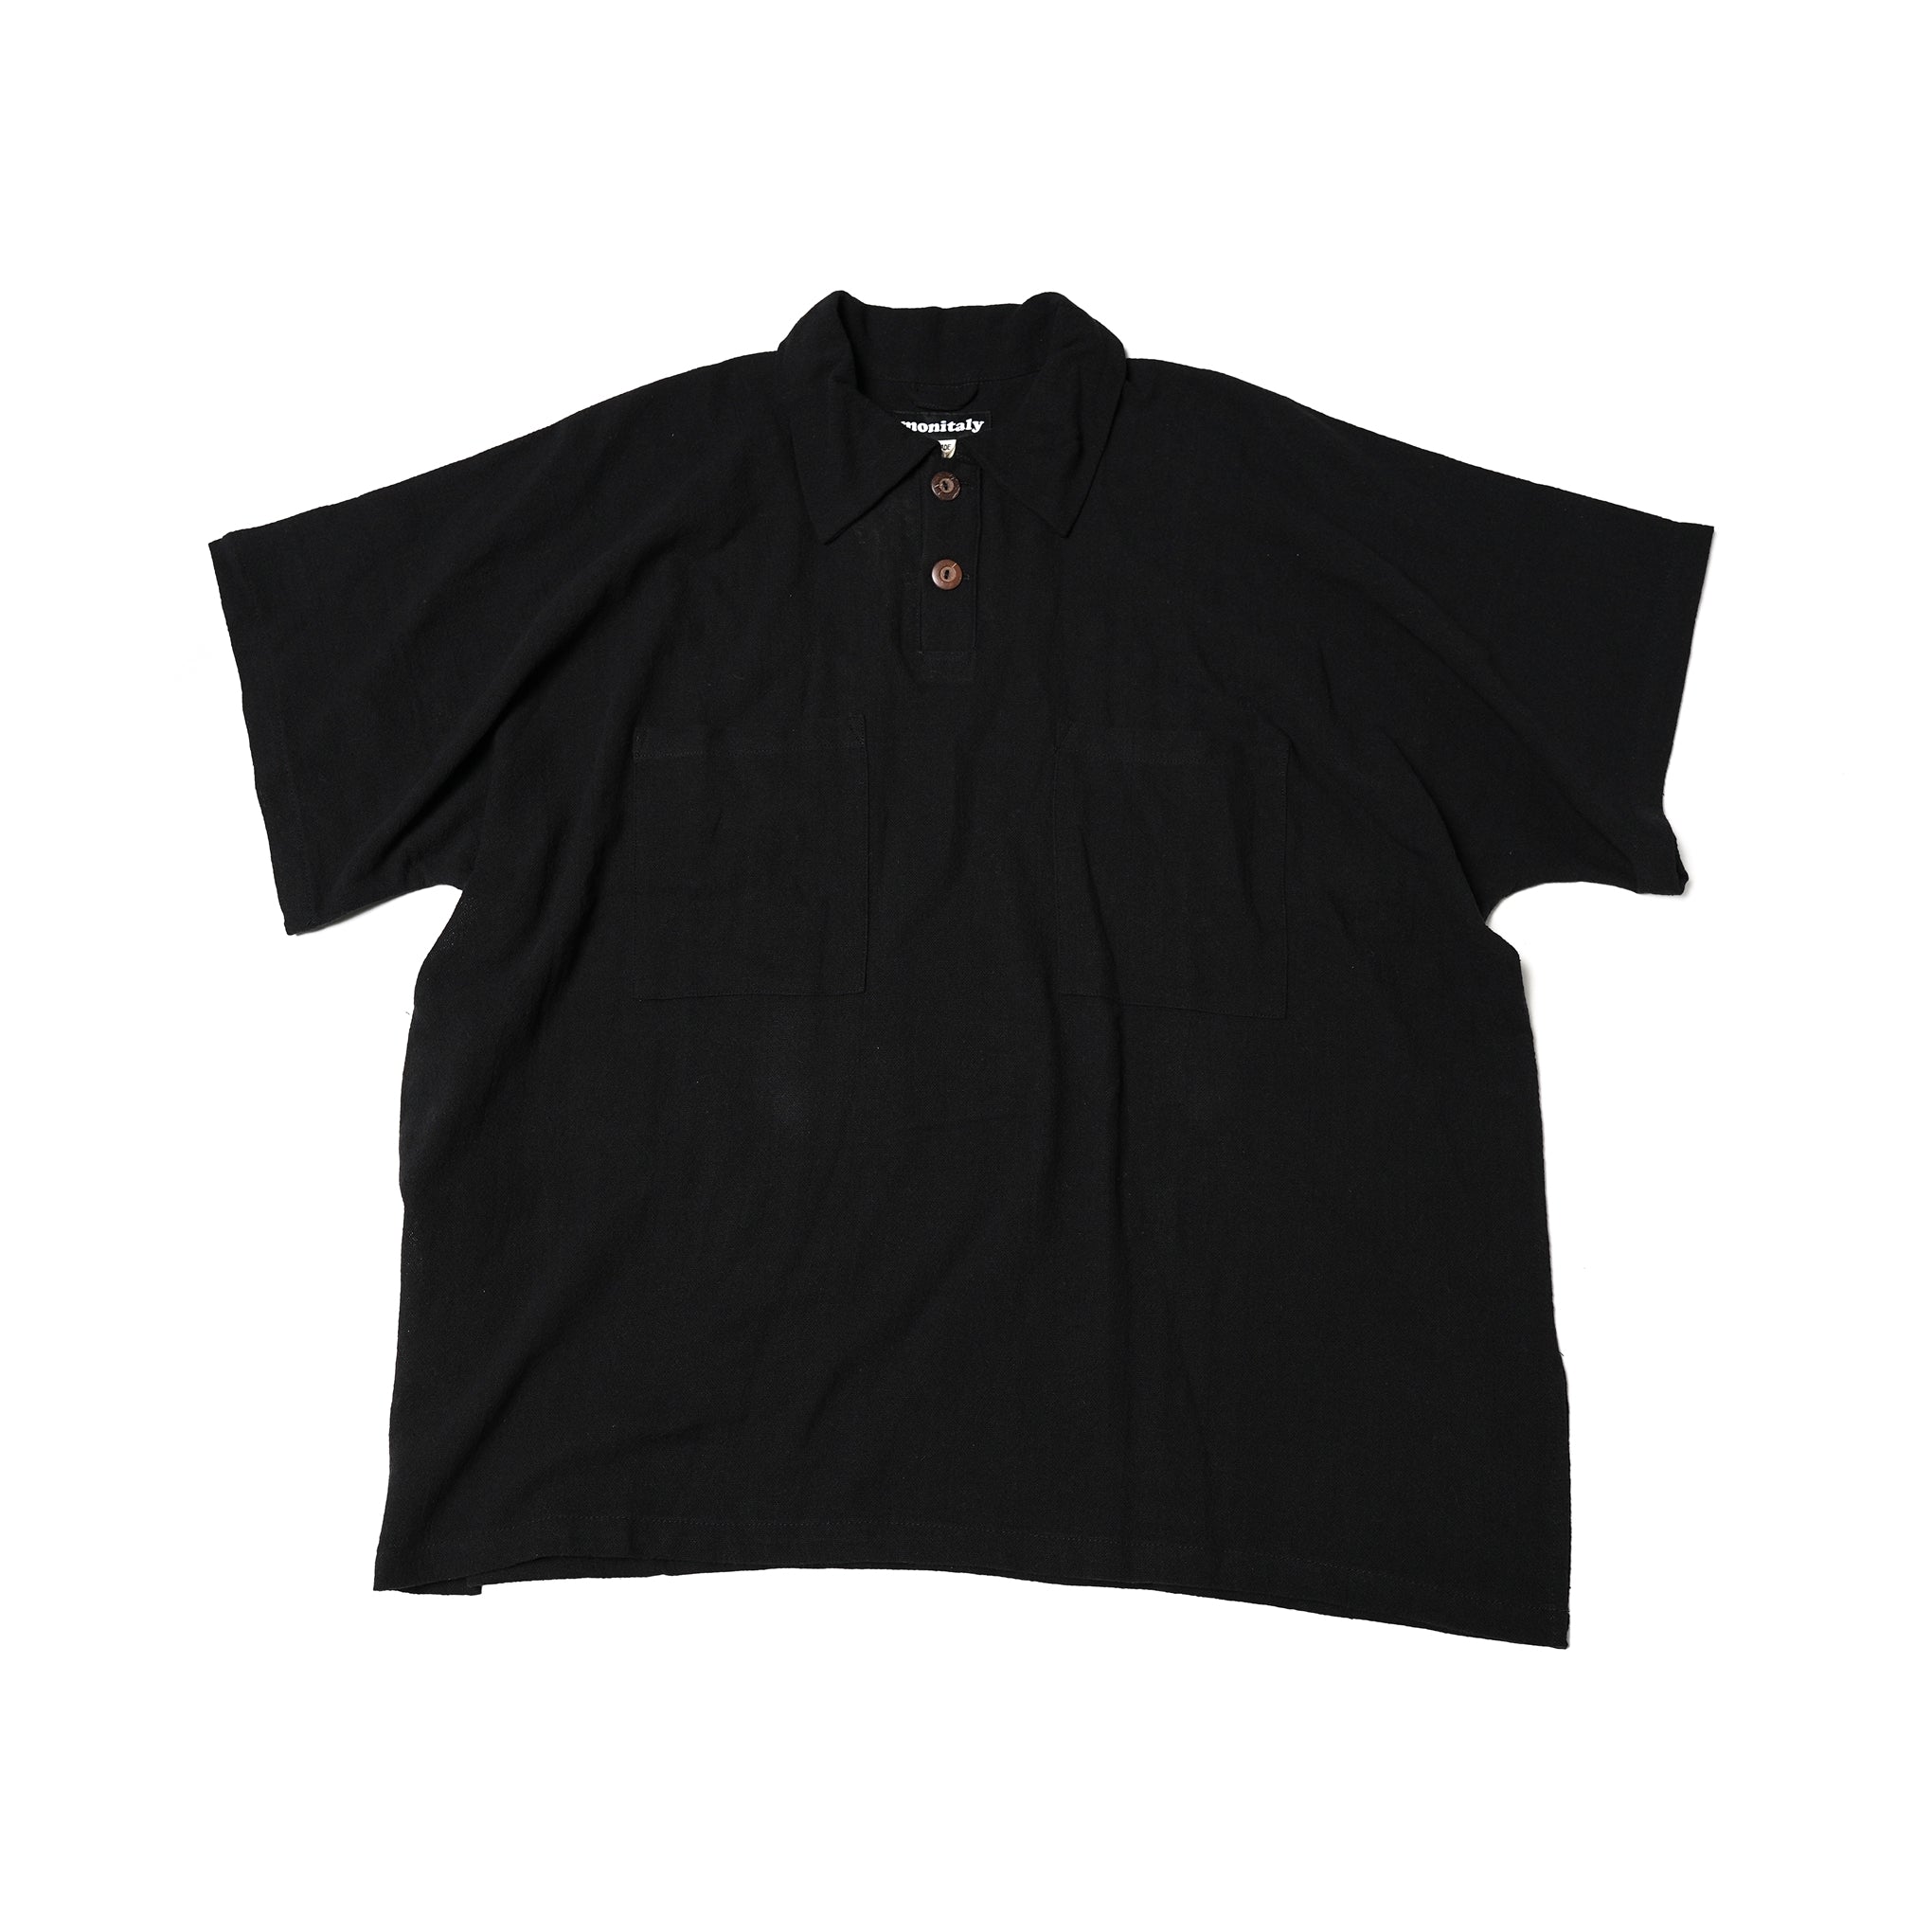 No:M31252-2 | Name:Poloponcho | Color:Tropical Black【MONITALY_モニタリー】